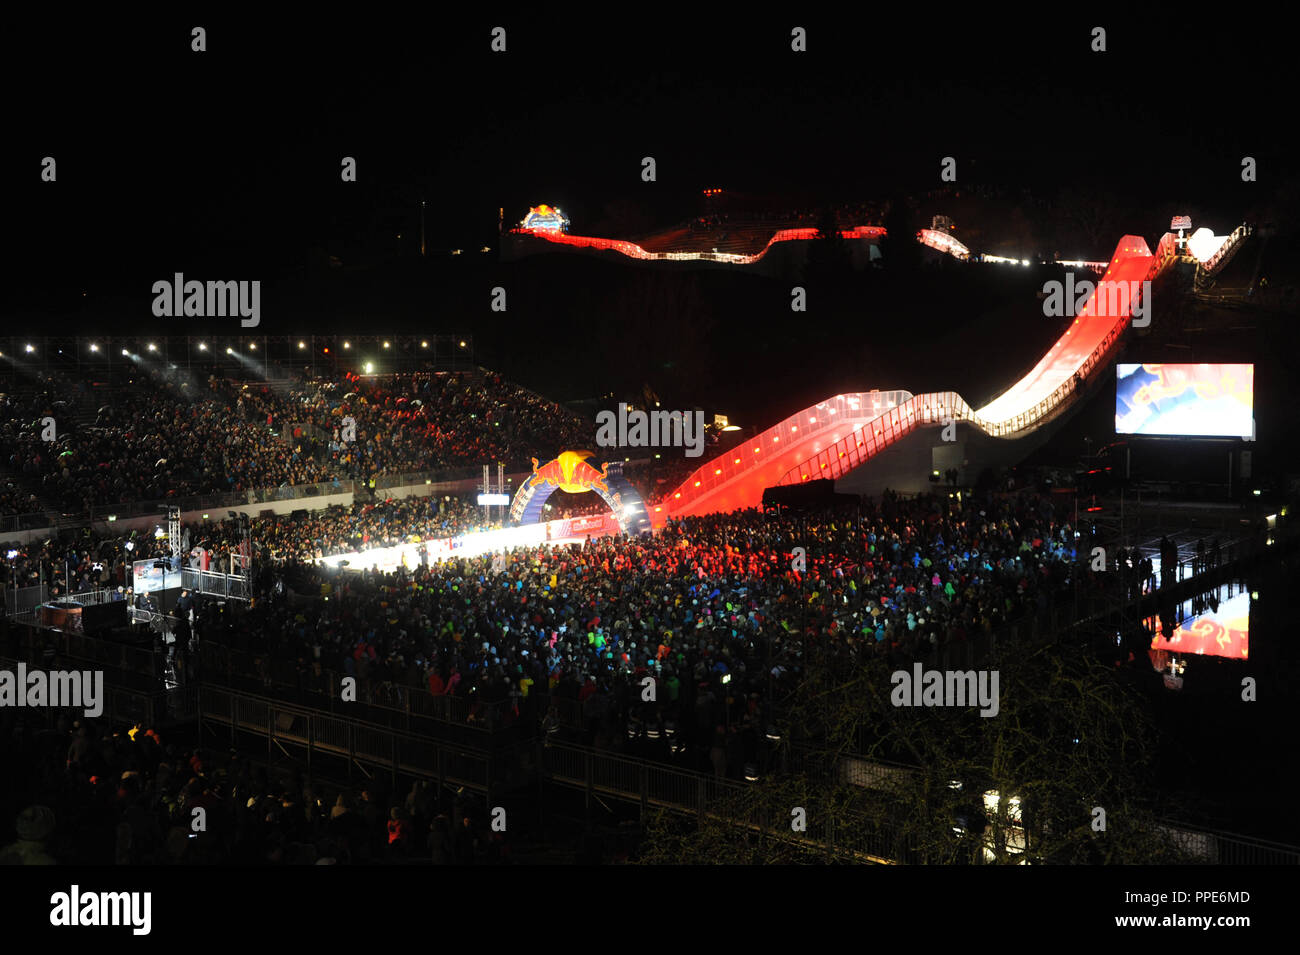 Red Bull Crashed Ice Contest in the Munich Olympiapark: the picture ...